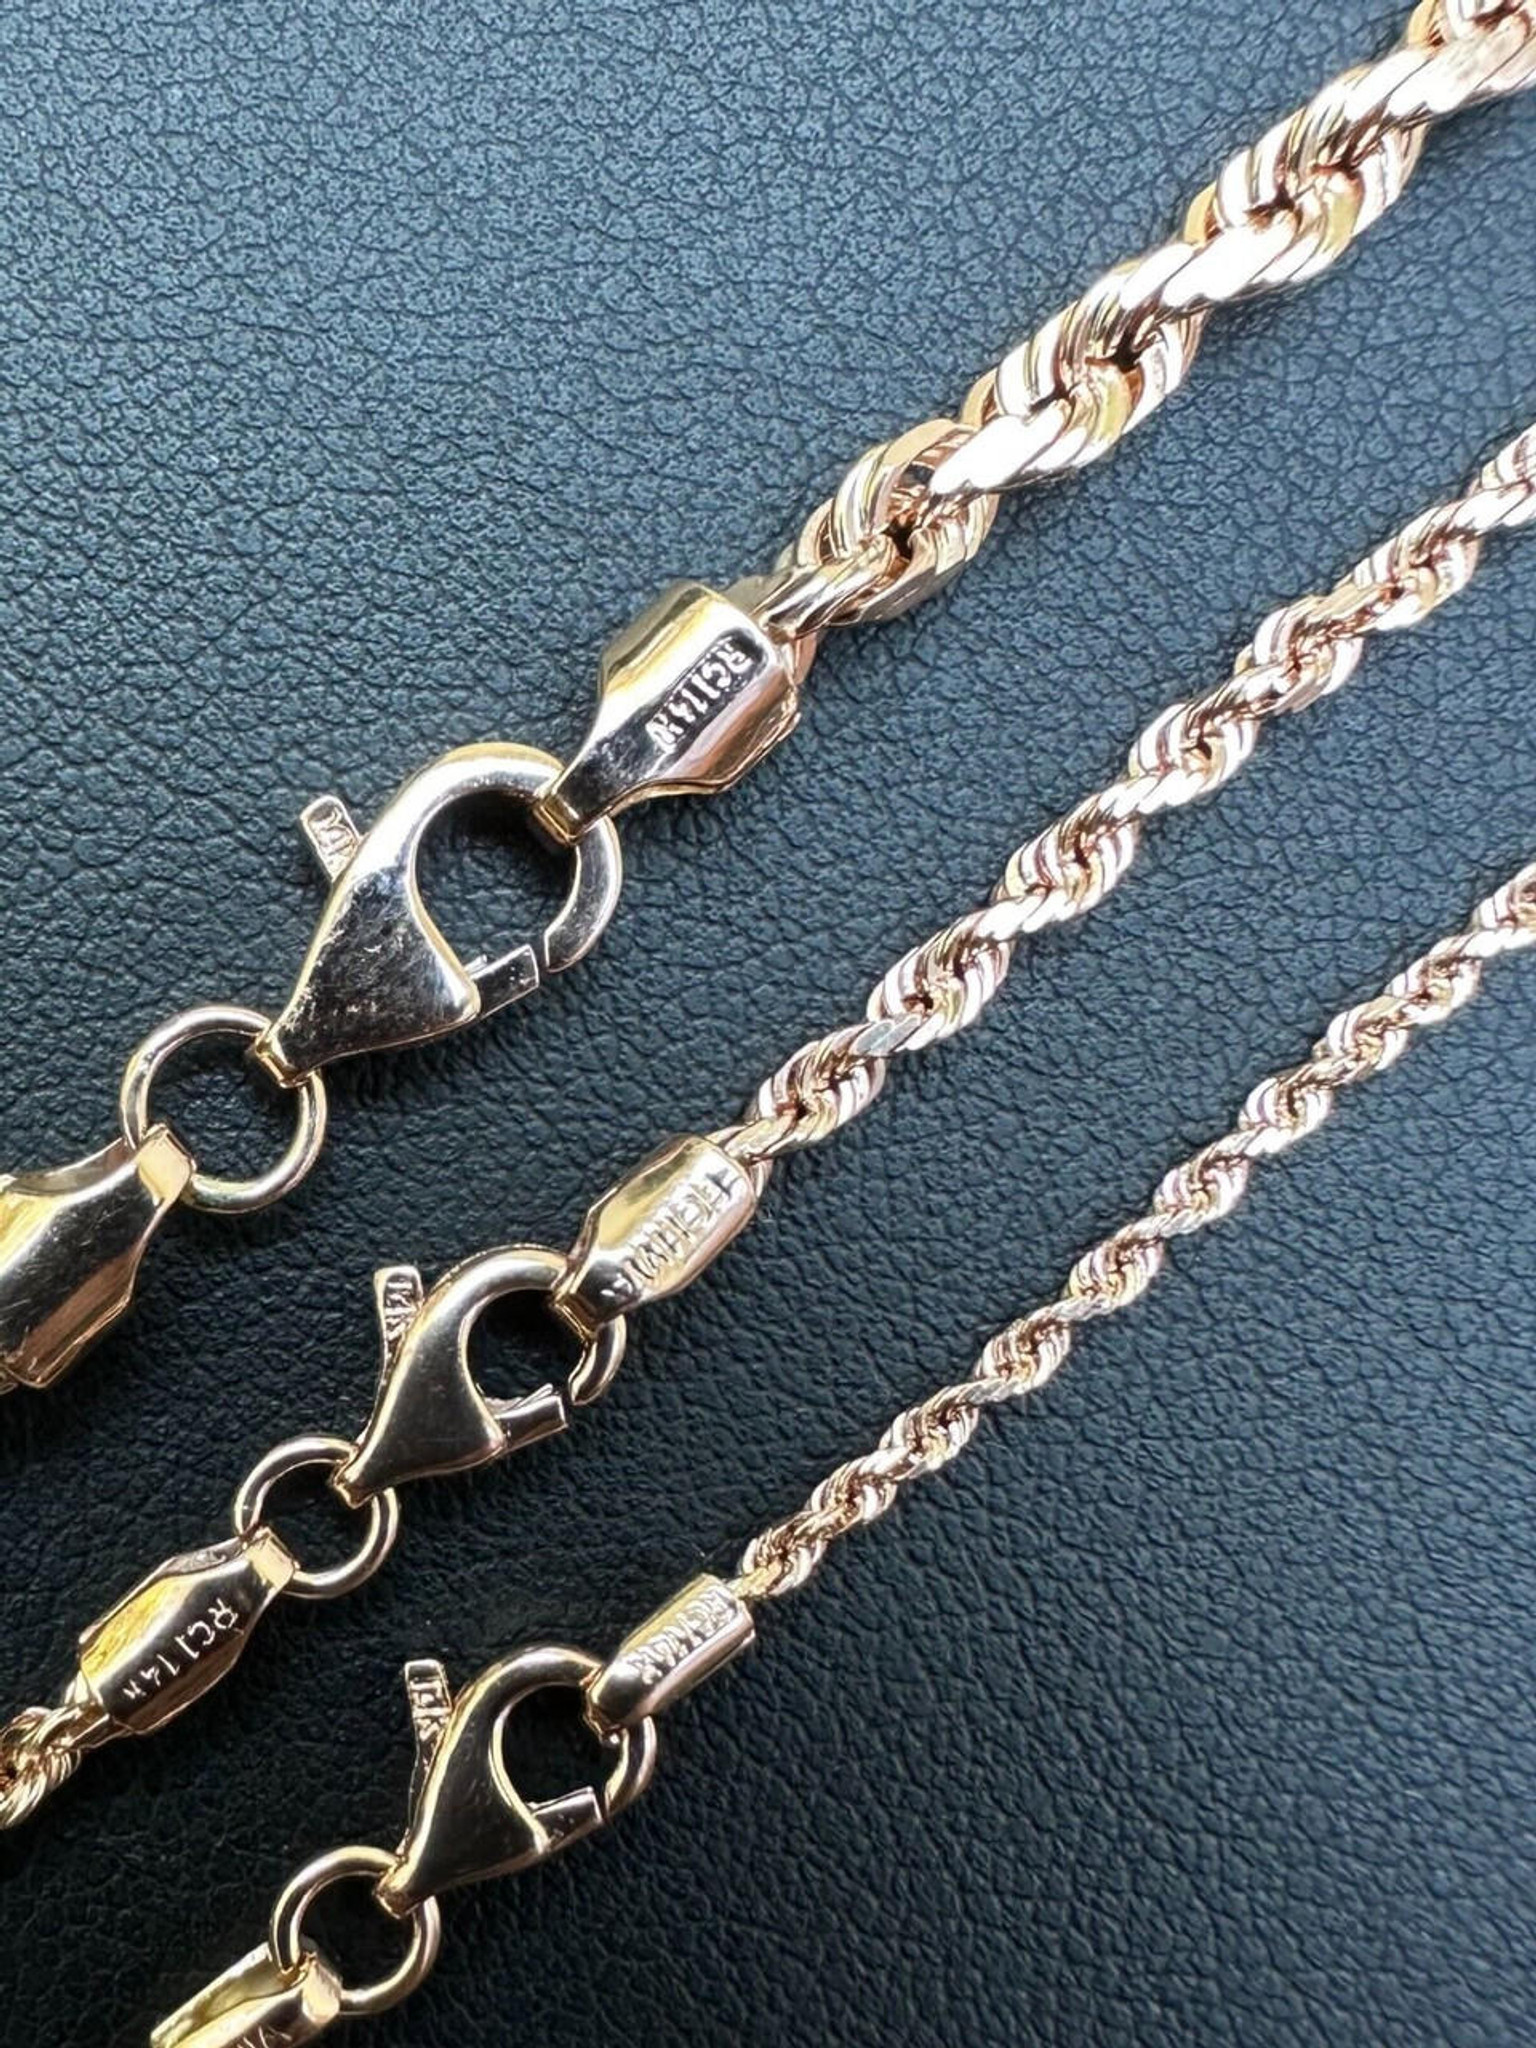 Women's 14K Gold Necklace Solid Rose Gold Rope Chain